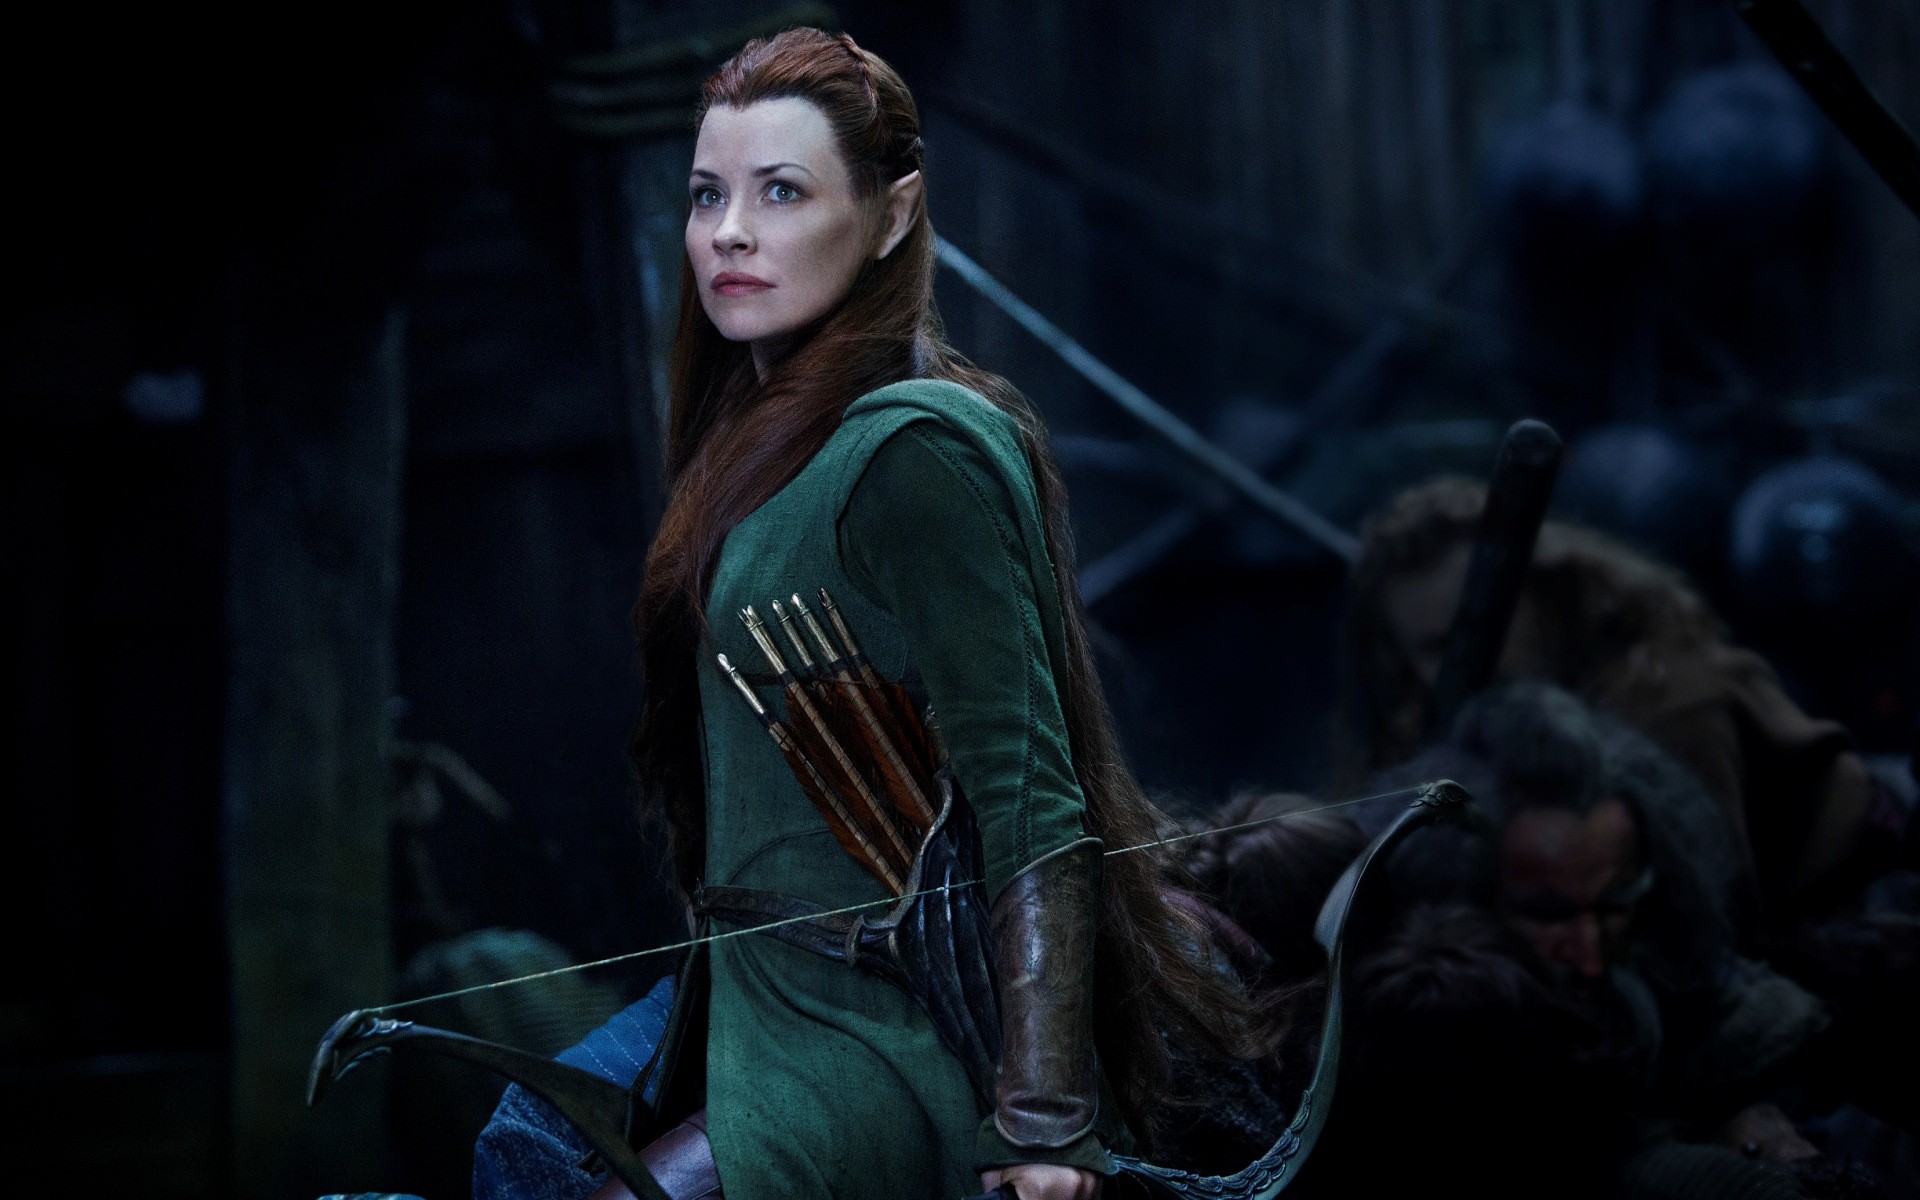 Tauriel Redhead Women Movies Evangeline Lilly The Hobbit The Battle Of The Five Armies Elves Girl Wi 1920x1200